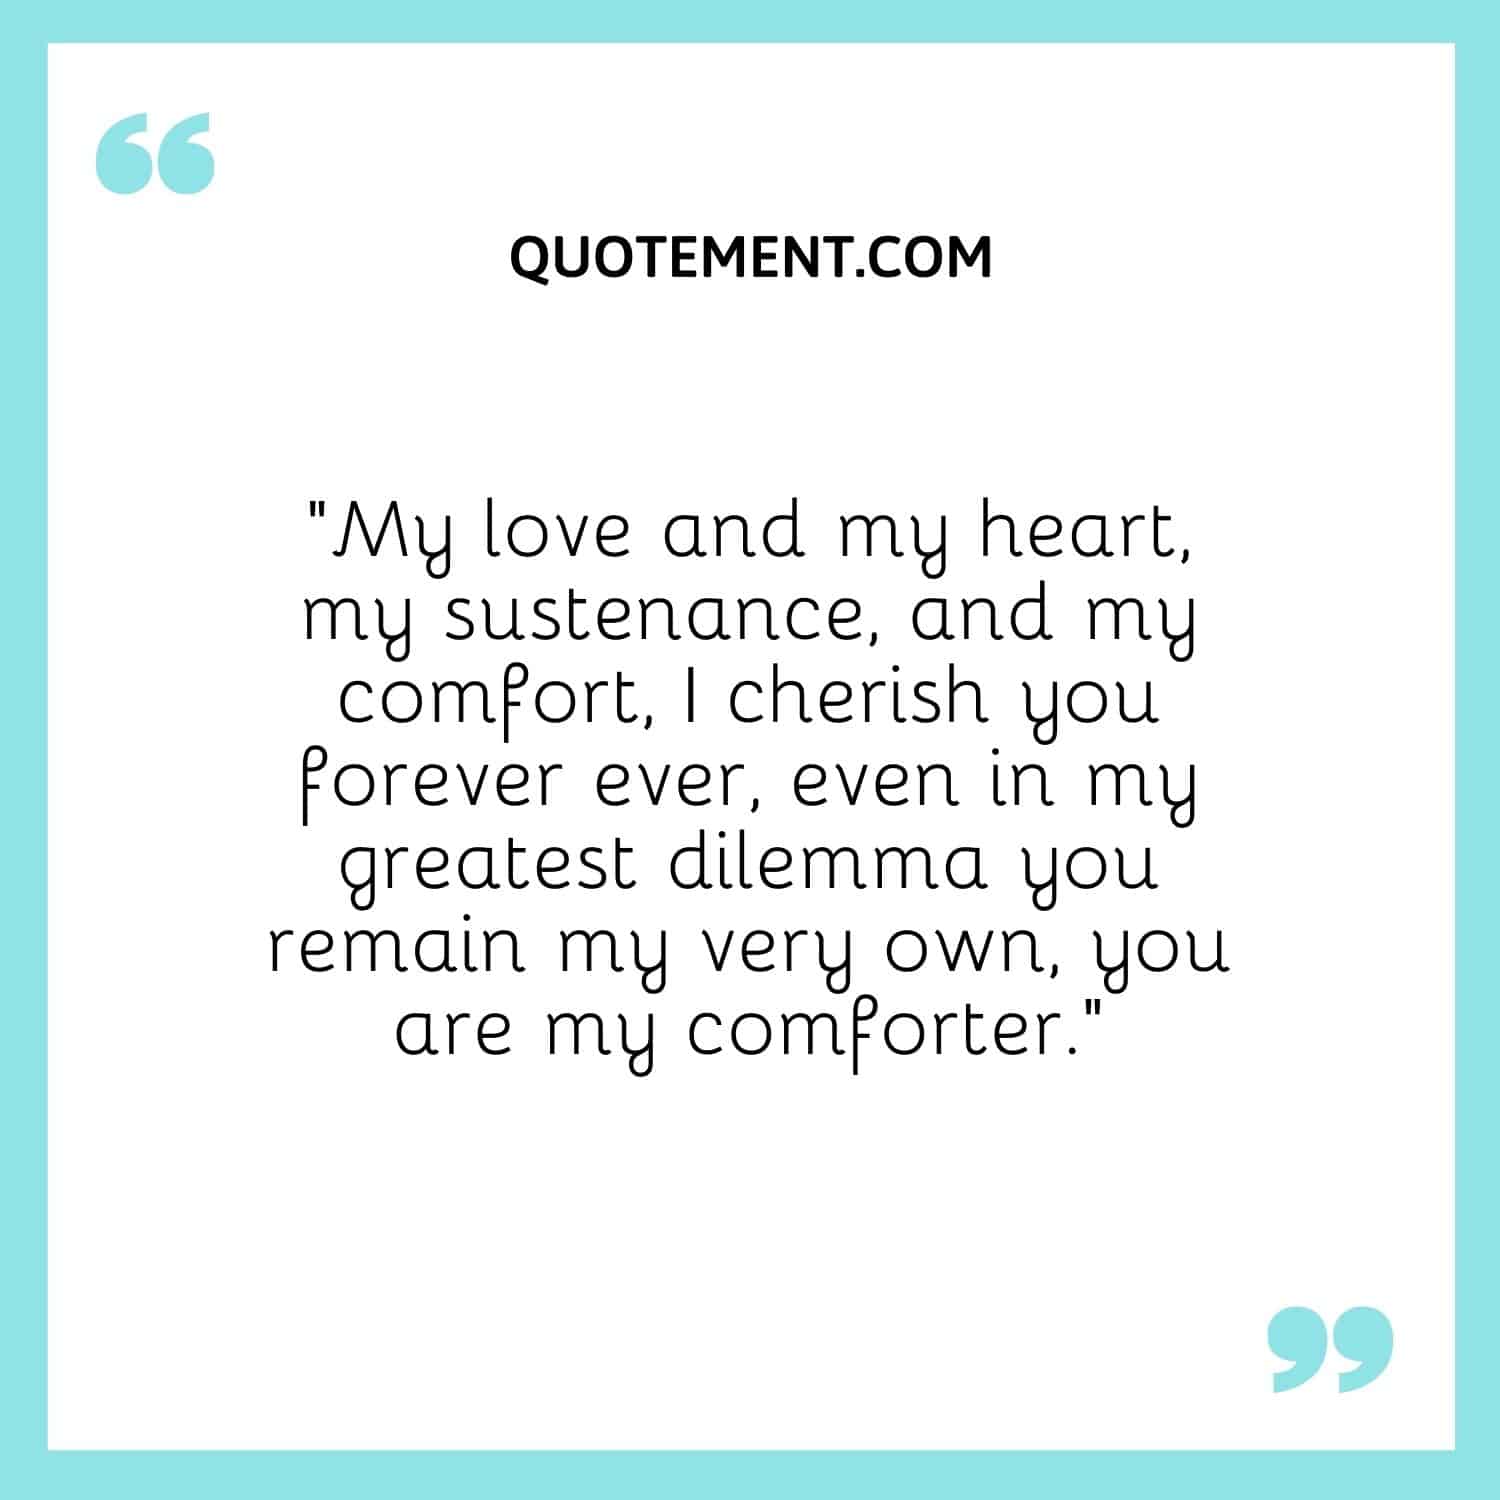 “My love and my heart, my sustenance, and my comfort, I cherish you forever ever, even in my greatest dilemma you remain my very own, you are my comforter.”